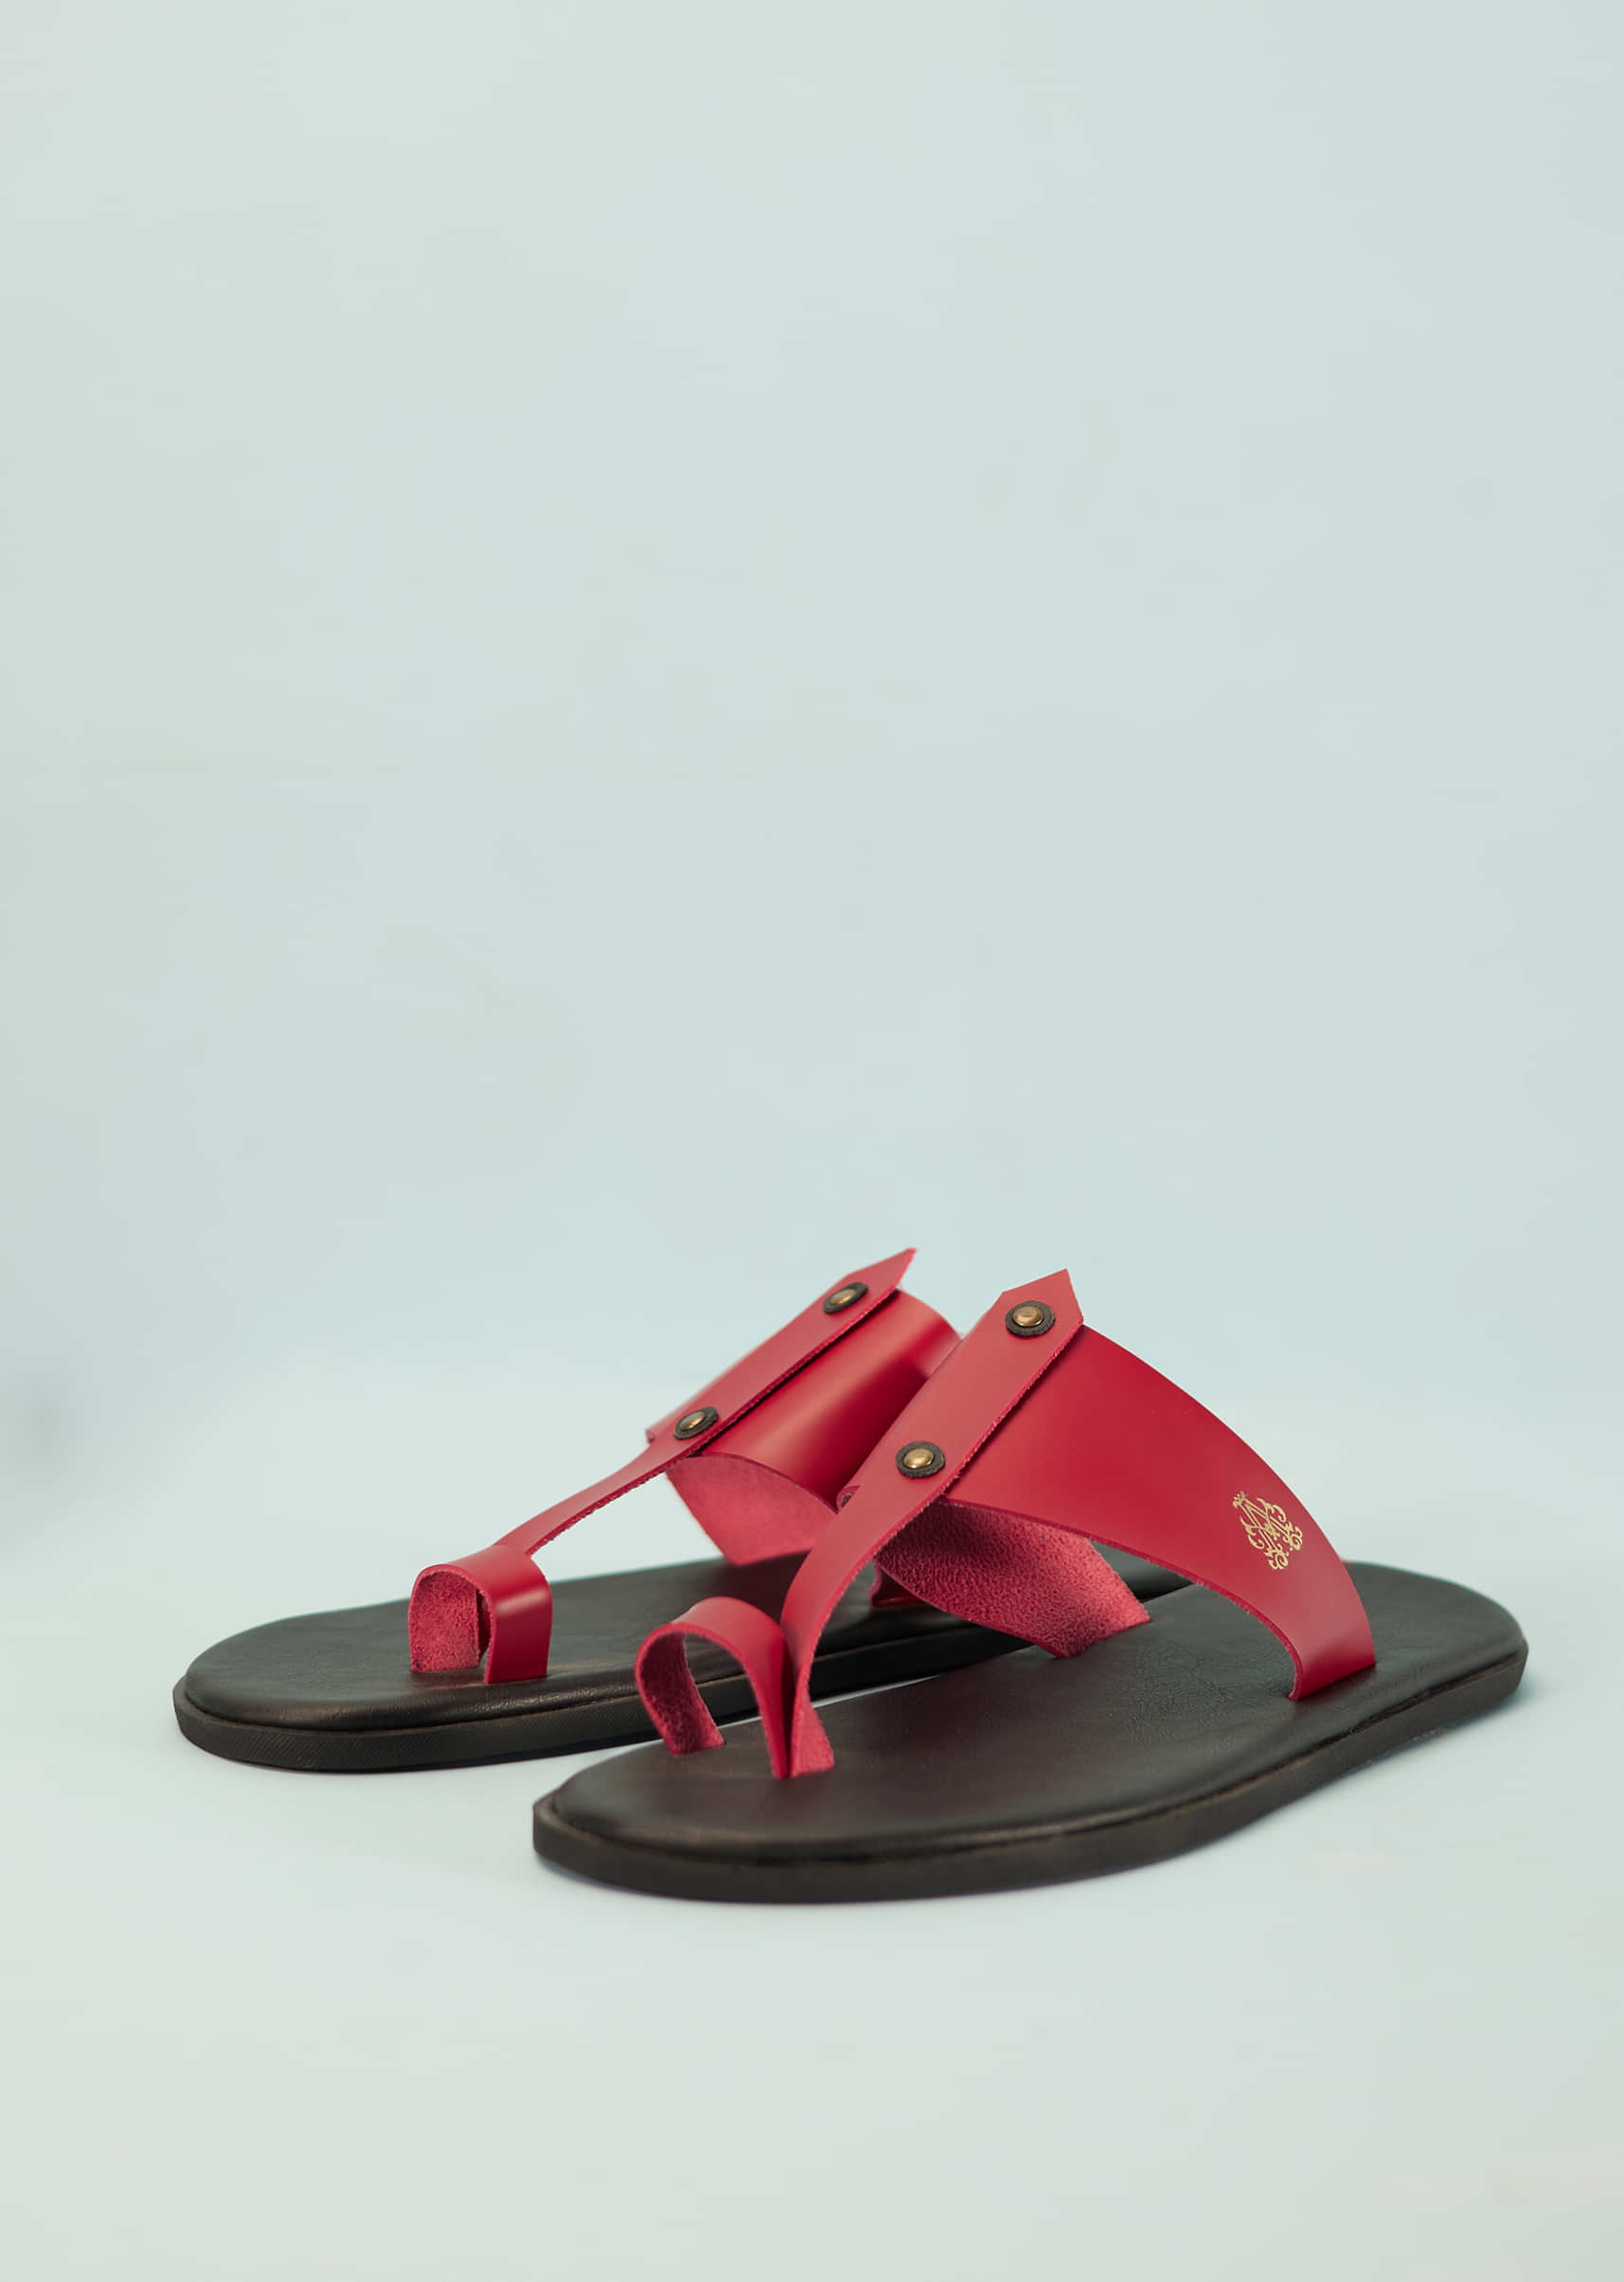 Black And Red Strappy Slides For Men In Leather With Buttons